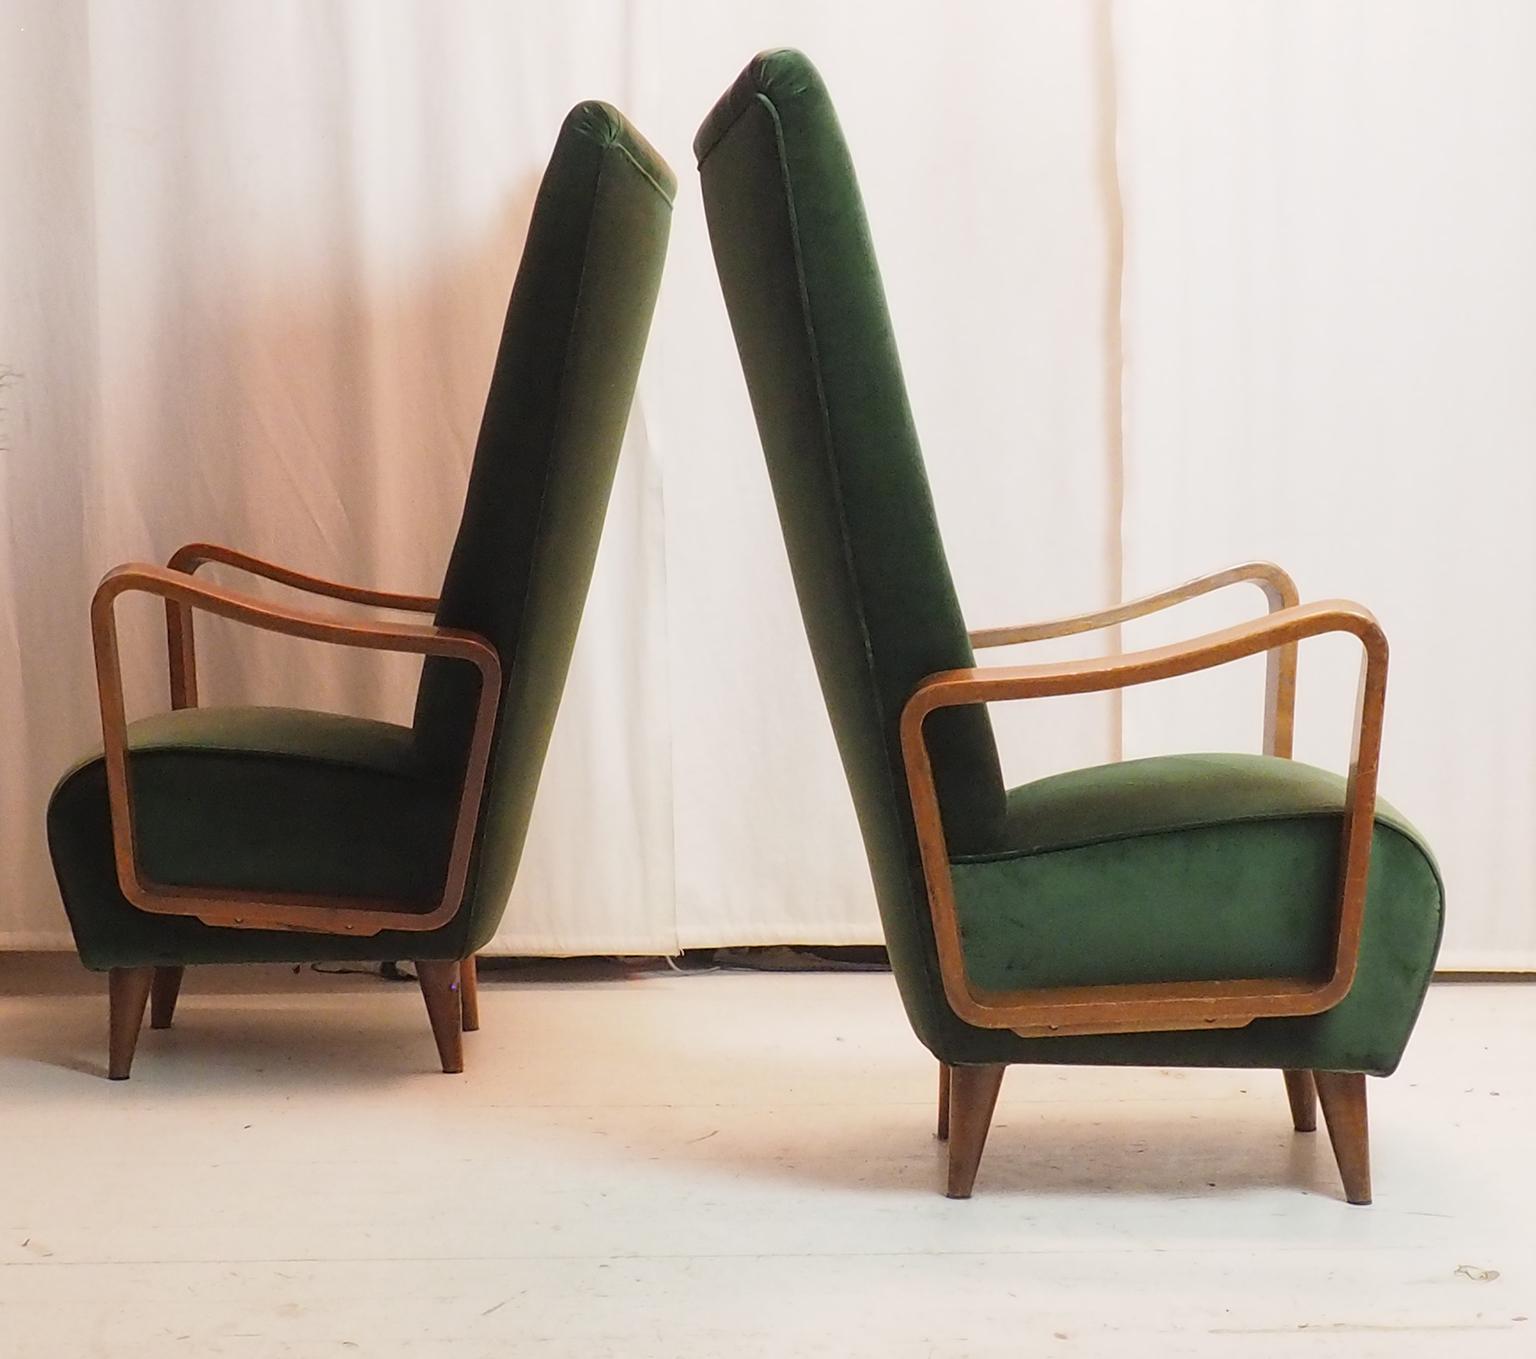 Midcentury High Back Italian Green Armchairs by Pietro Lingeri, Italy 1950s For Sale 9